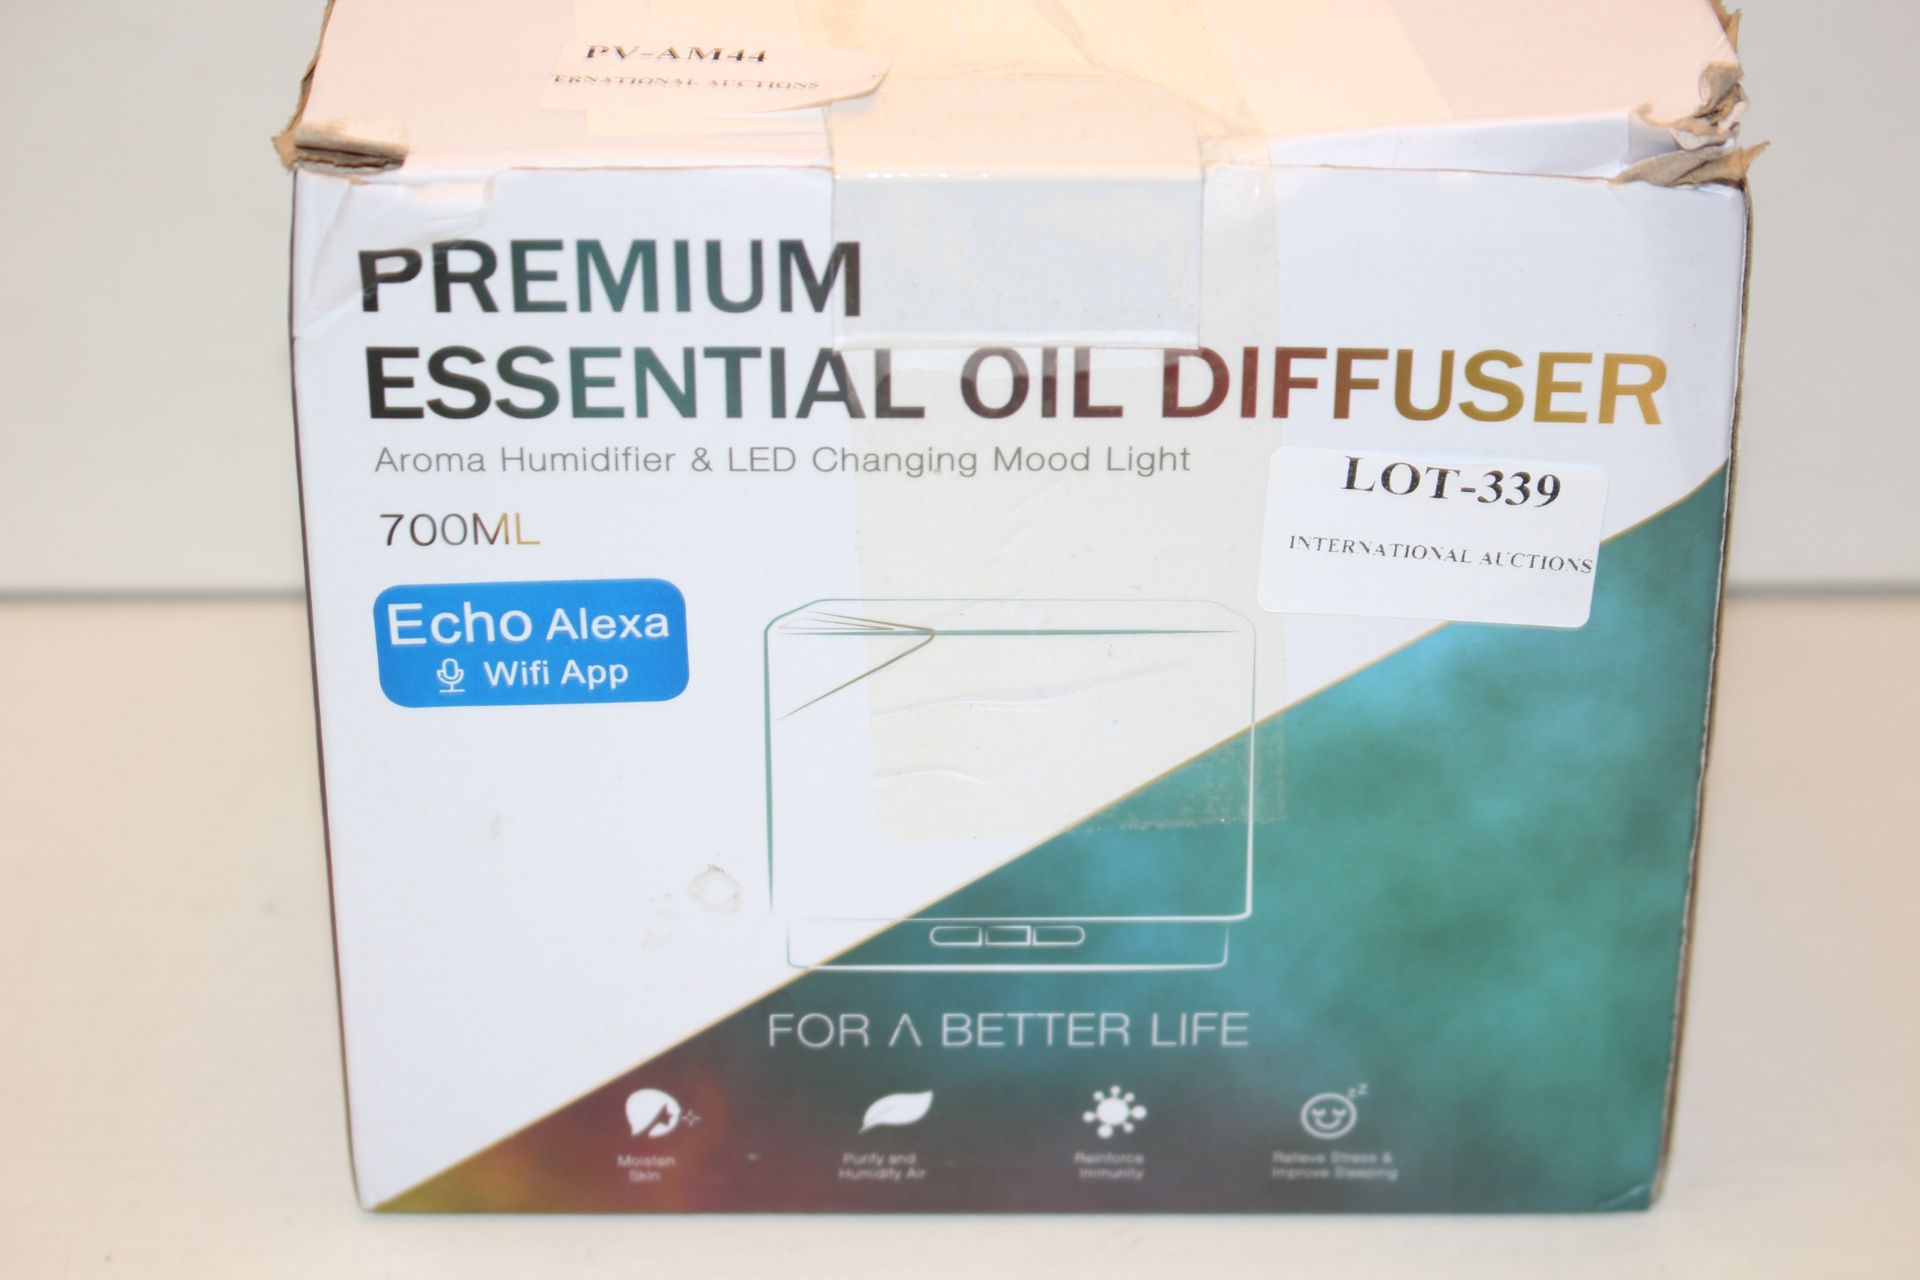 BOXED PREMIUM ESSENTIAL OIL DIFFUSER AROMA HUMIDIFIER & LED CHANGING MOOD LIGHT 700ML RRP £36.